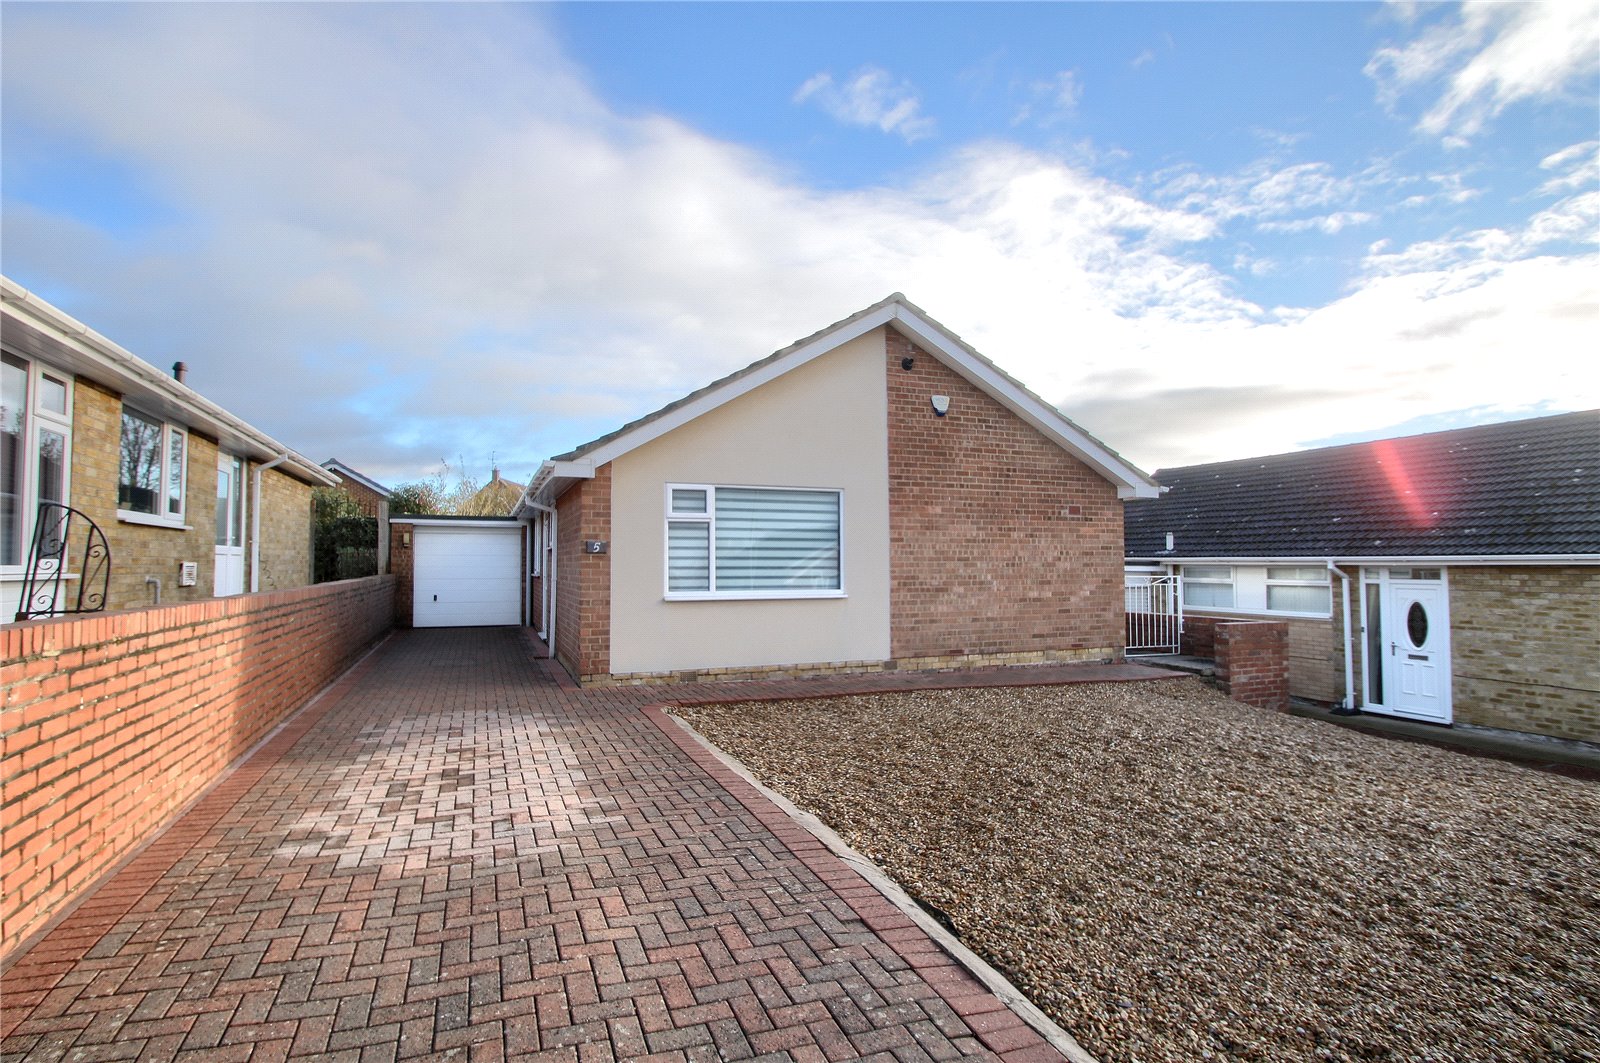 3 bed bungalow for sale in Valley Gardens, Eaglescliffe 1